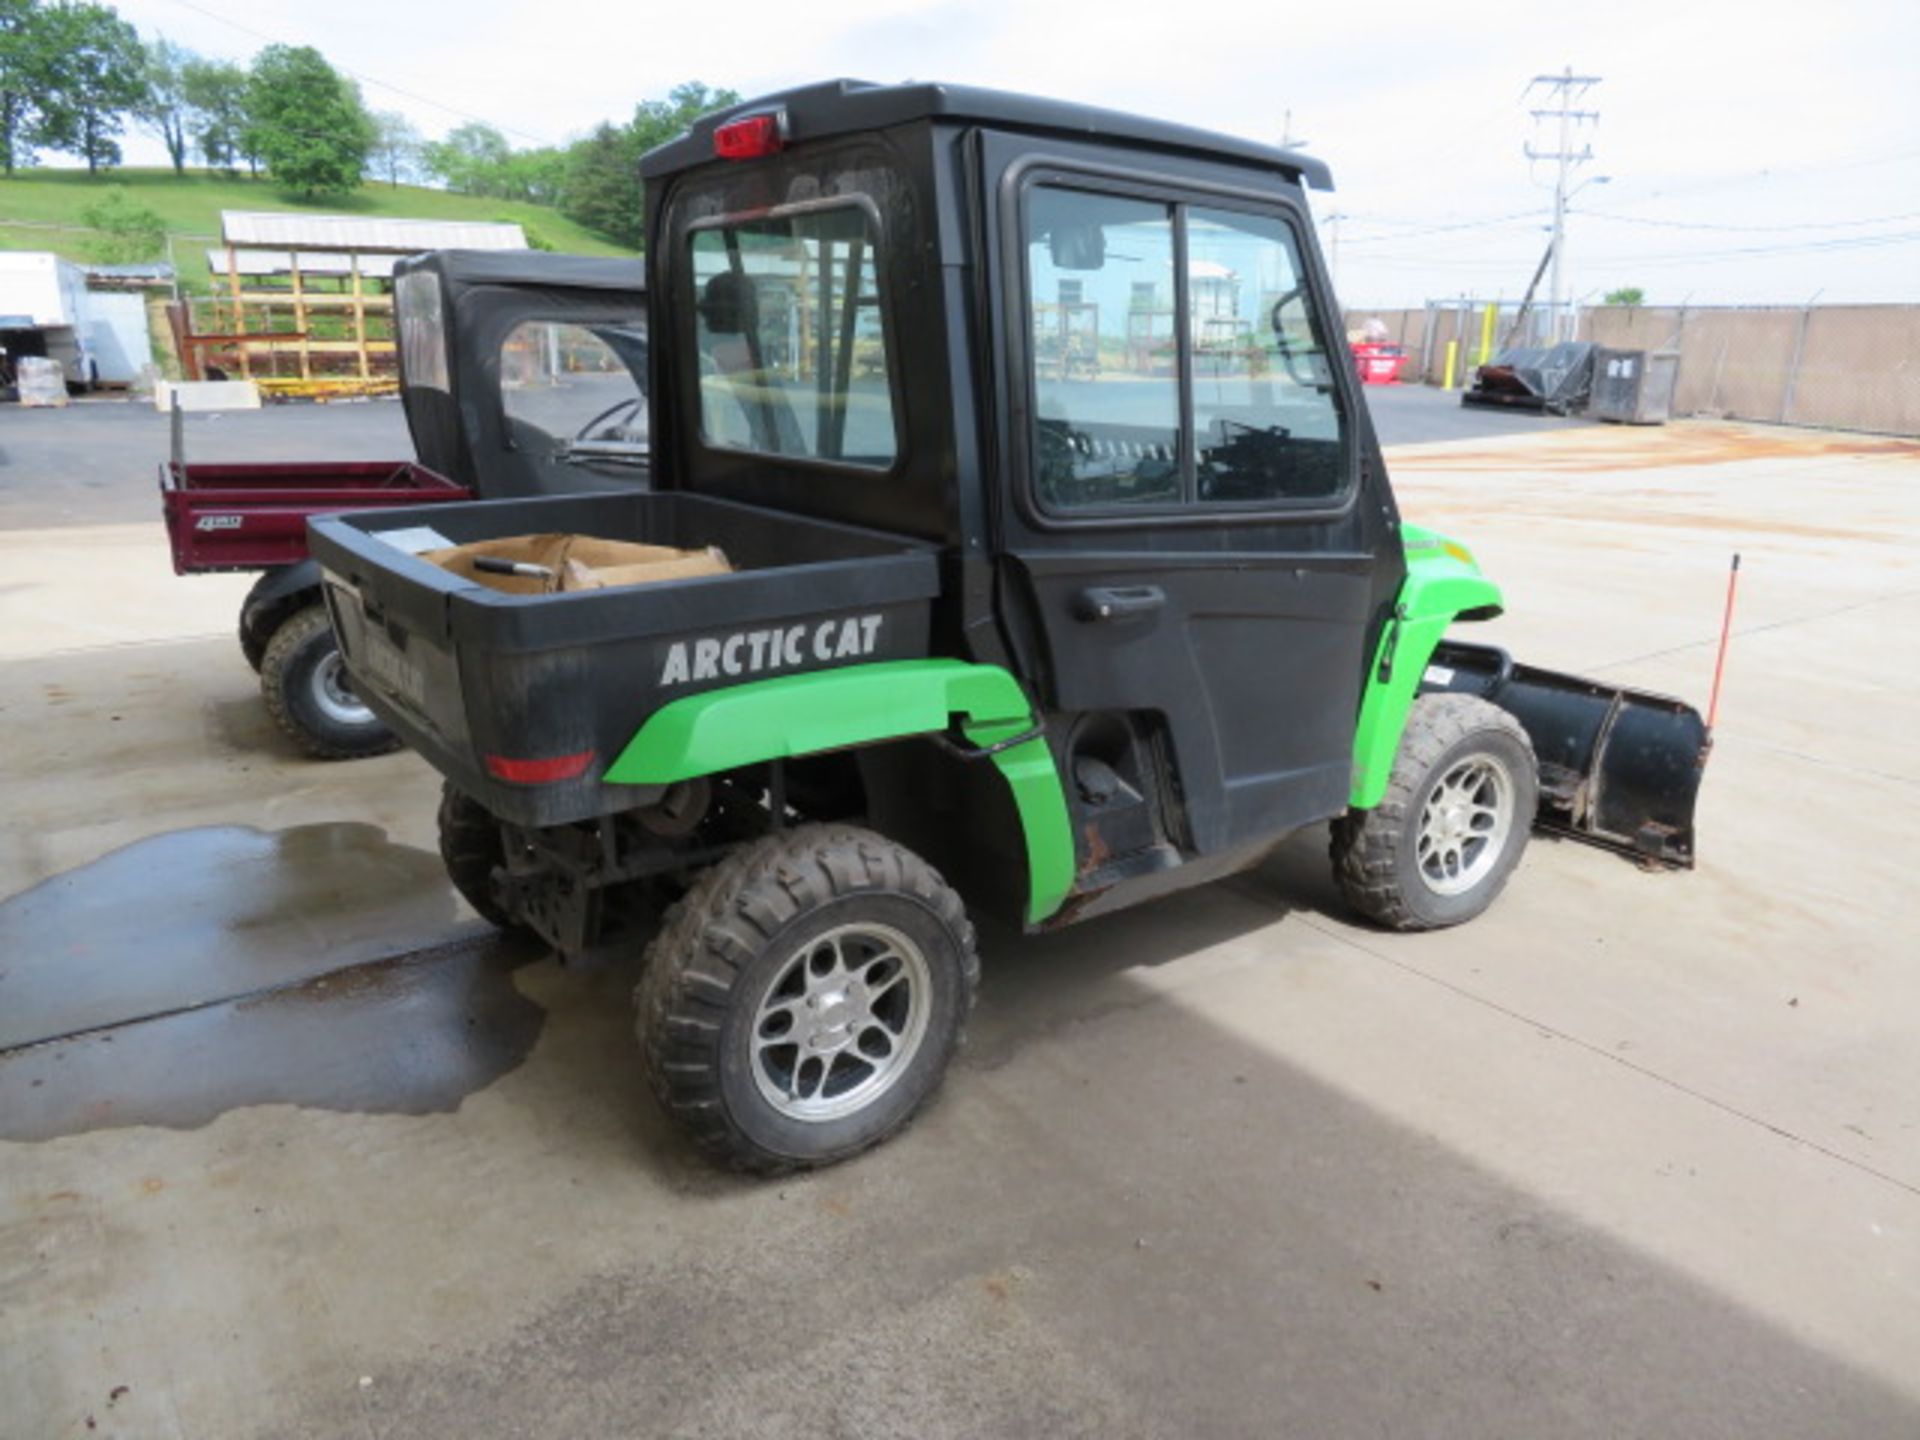 2009 ARCTIC CAT PROWLER XT 650 W/ CURTIS SNOW PLOW W/ CONTROL, ENCLOSED CAB & POLY PICK UP BED - Image 4 of 5